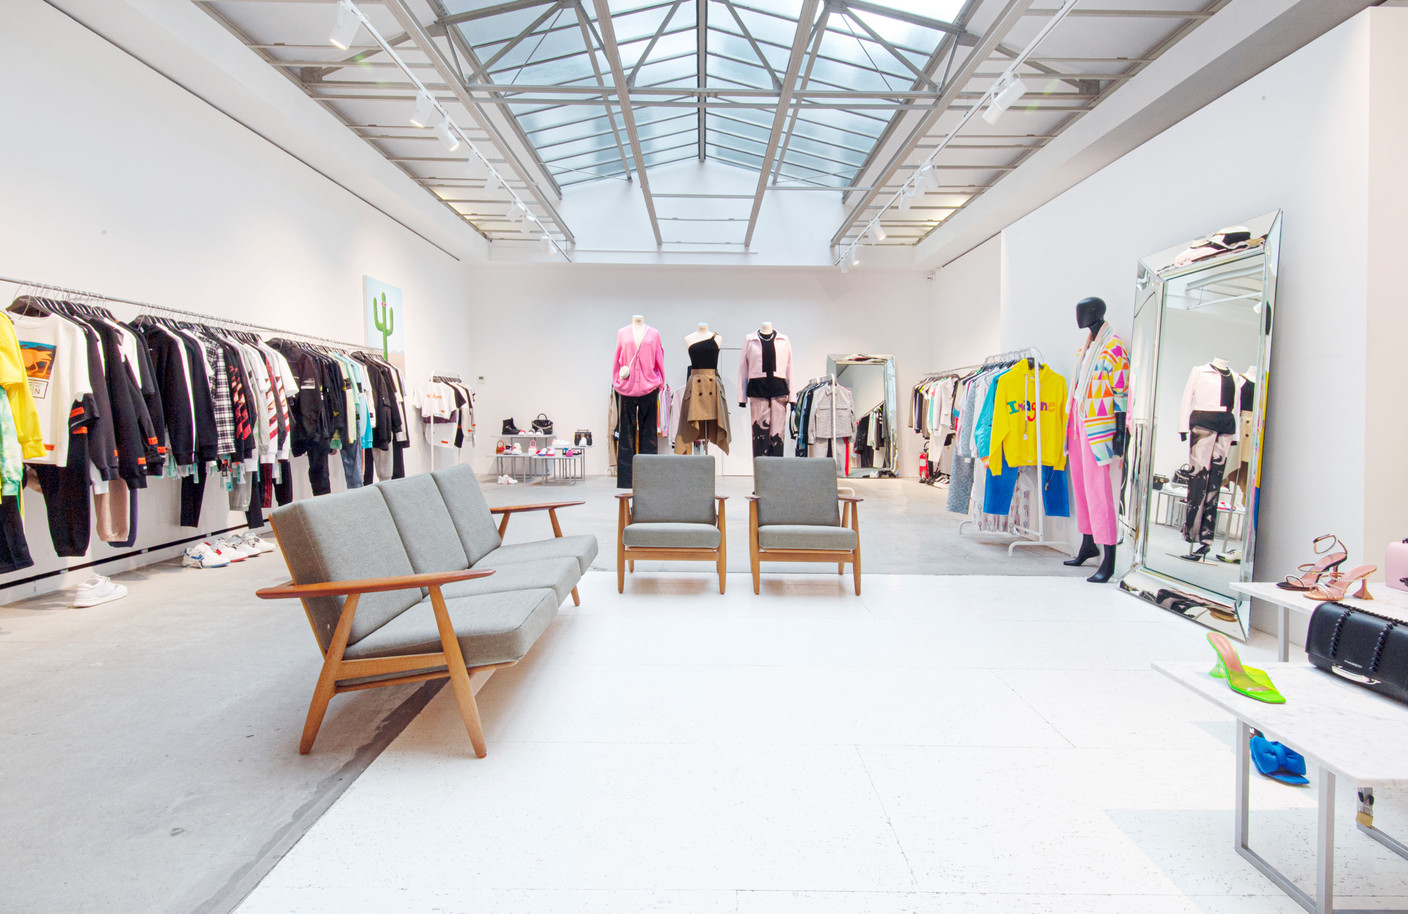 The Brussels outlet focuses more on young designers. (Photo: Henri Doyen/Smets)